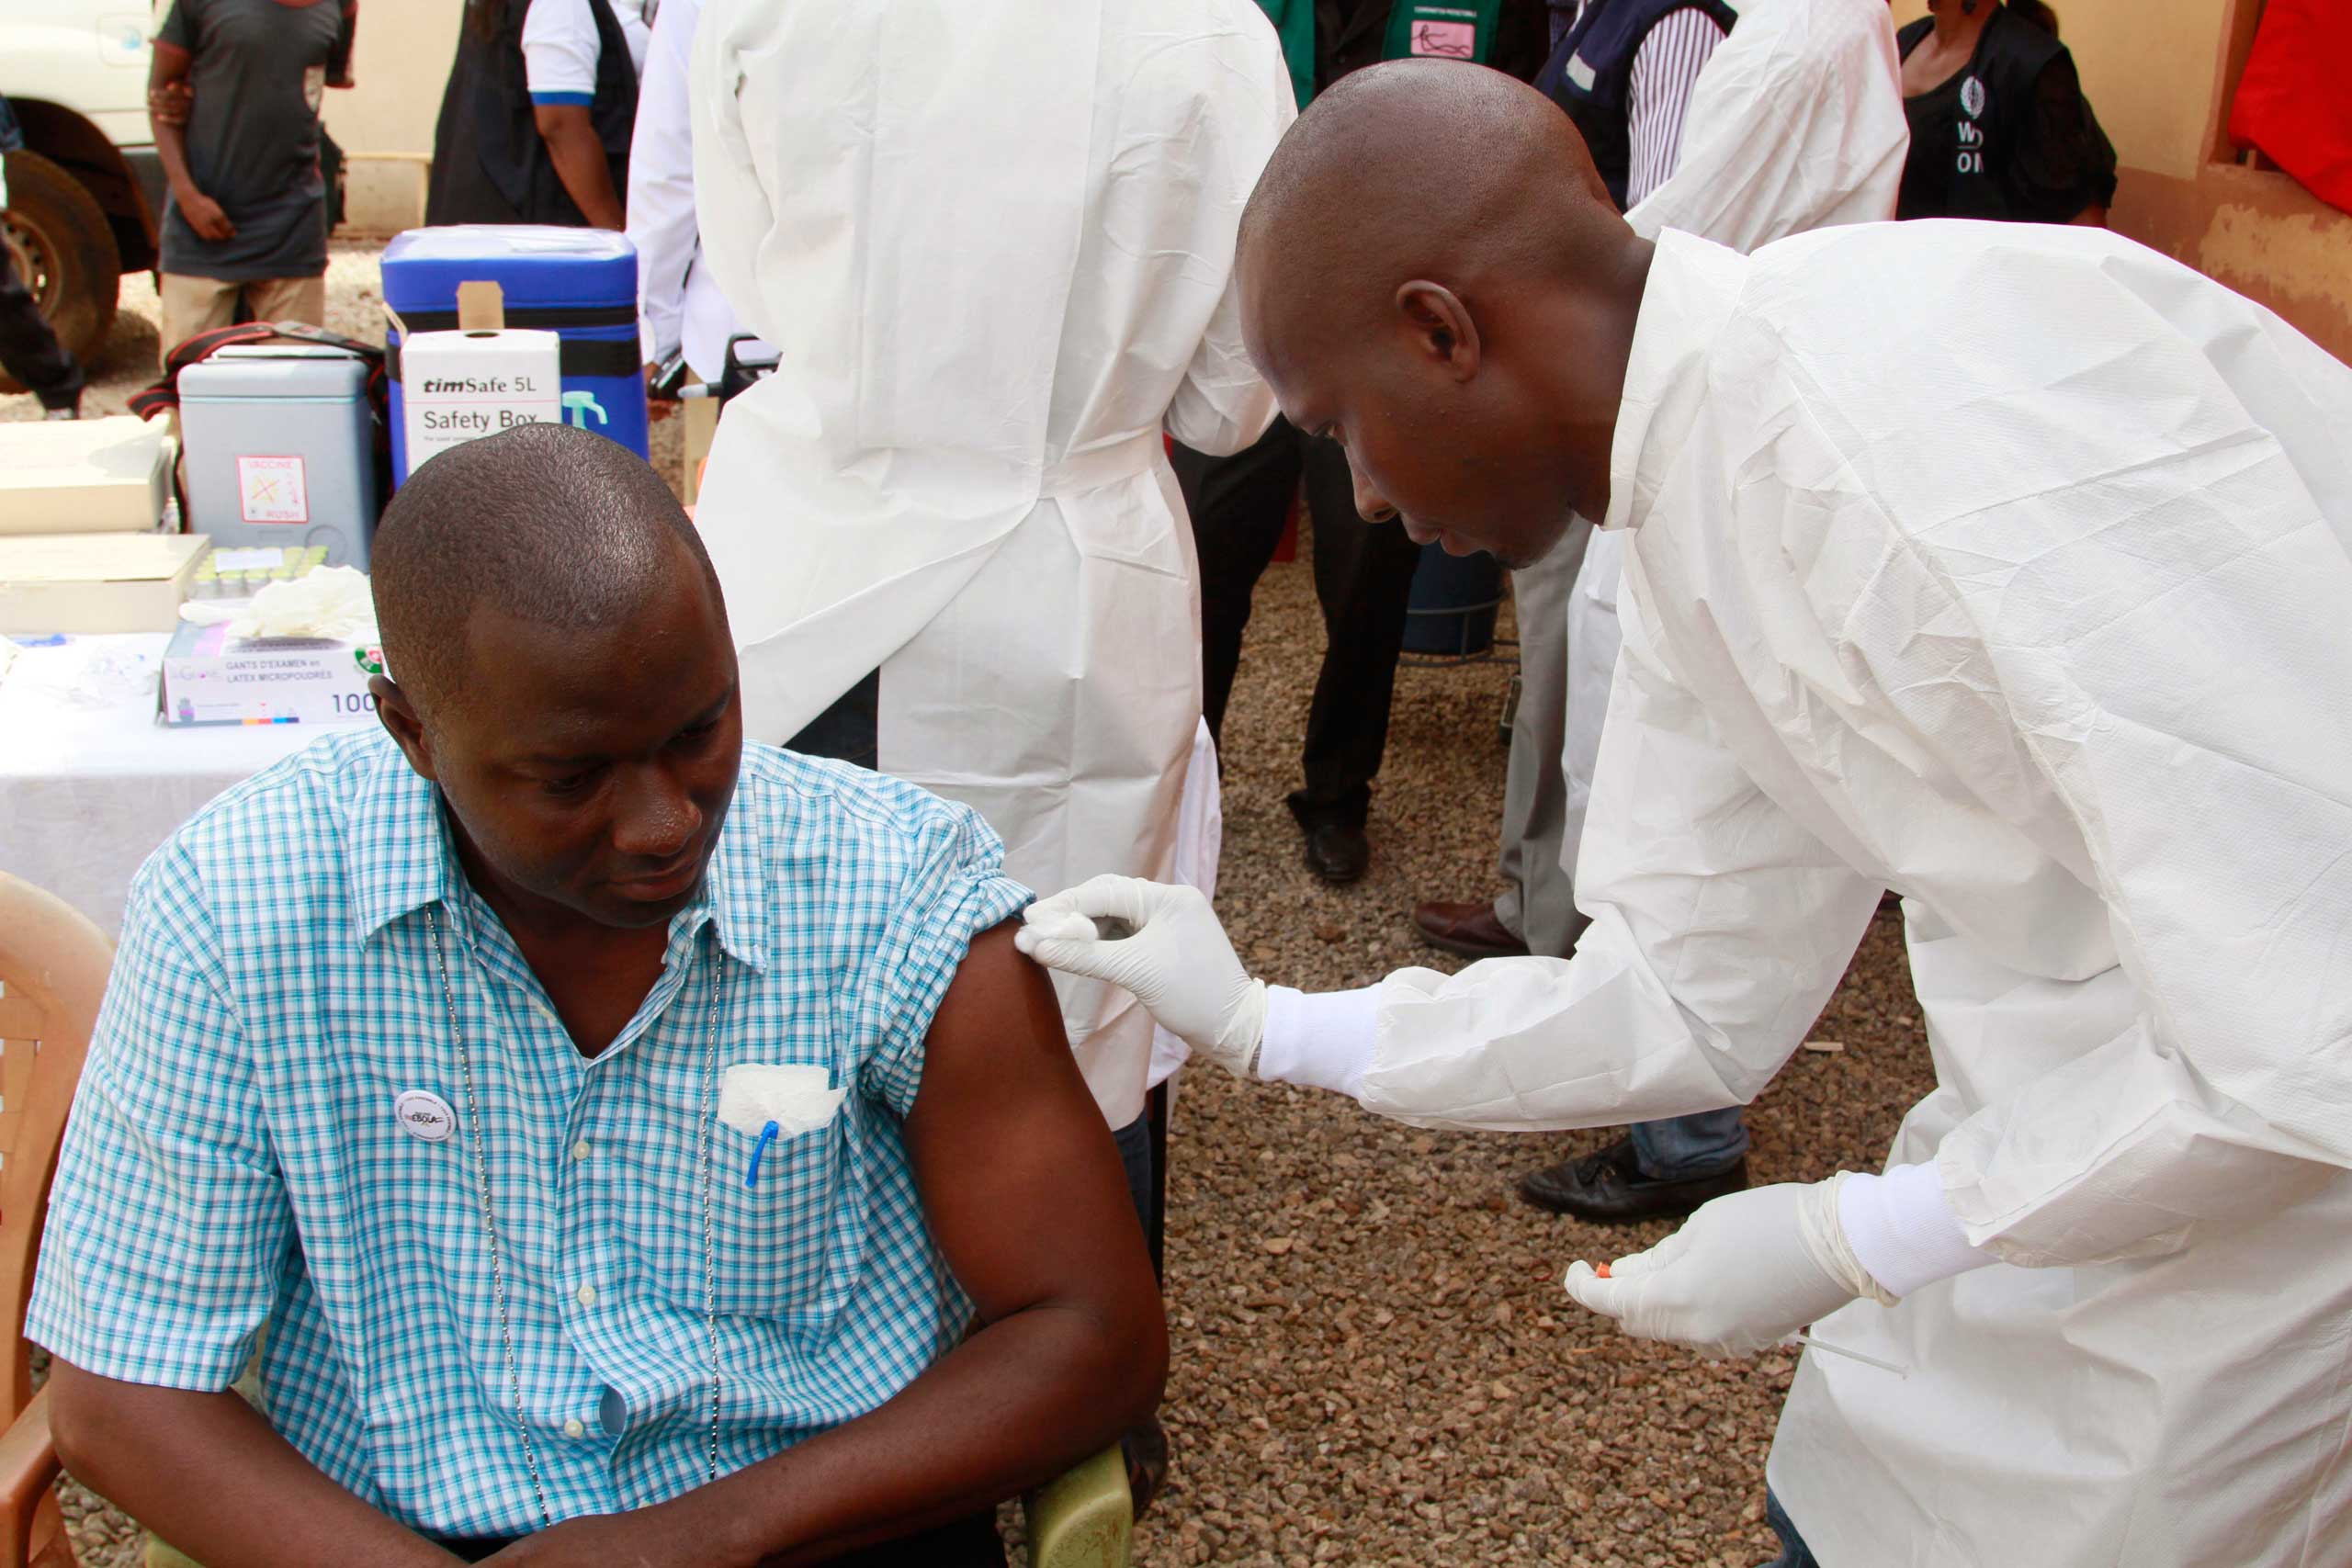 A health worker, right, cleans a man's arm before injecting him with a Ebola vaccine in Conakry, Guinea, March 7, 2015. (Youssouf Bah—AP)